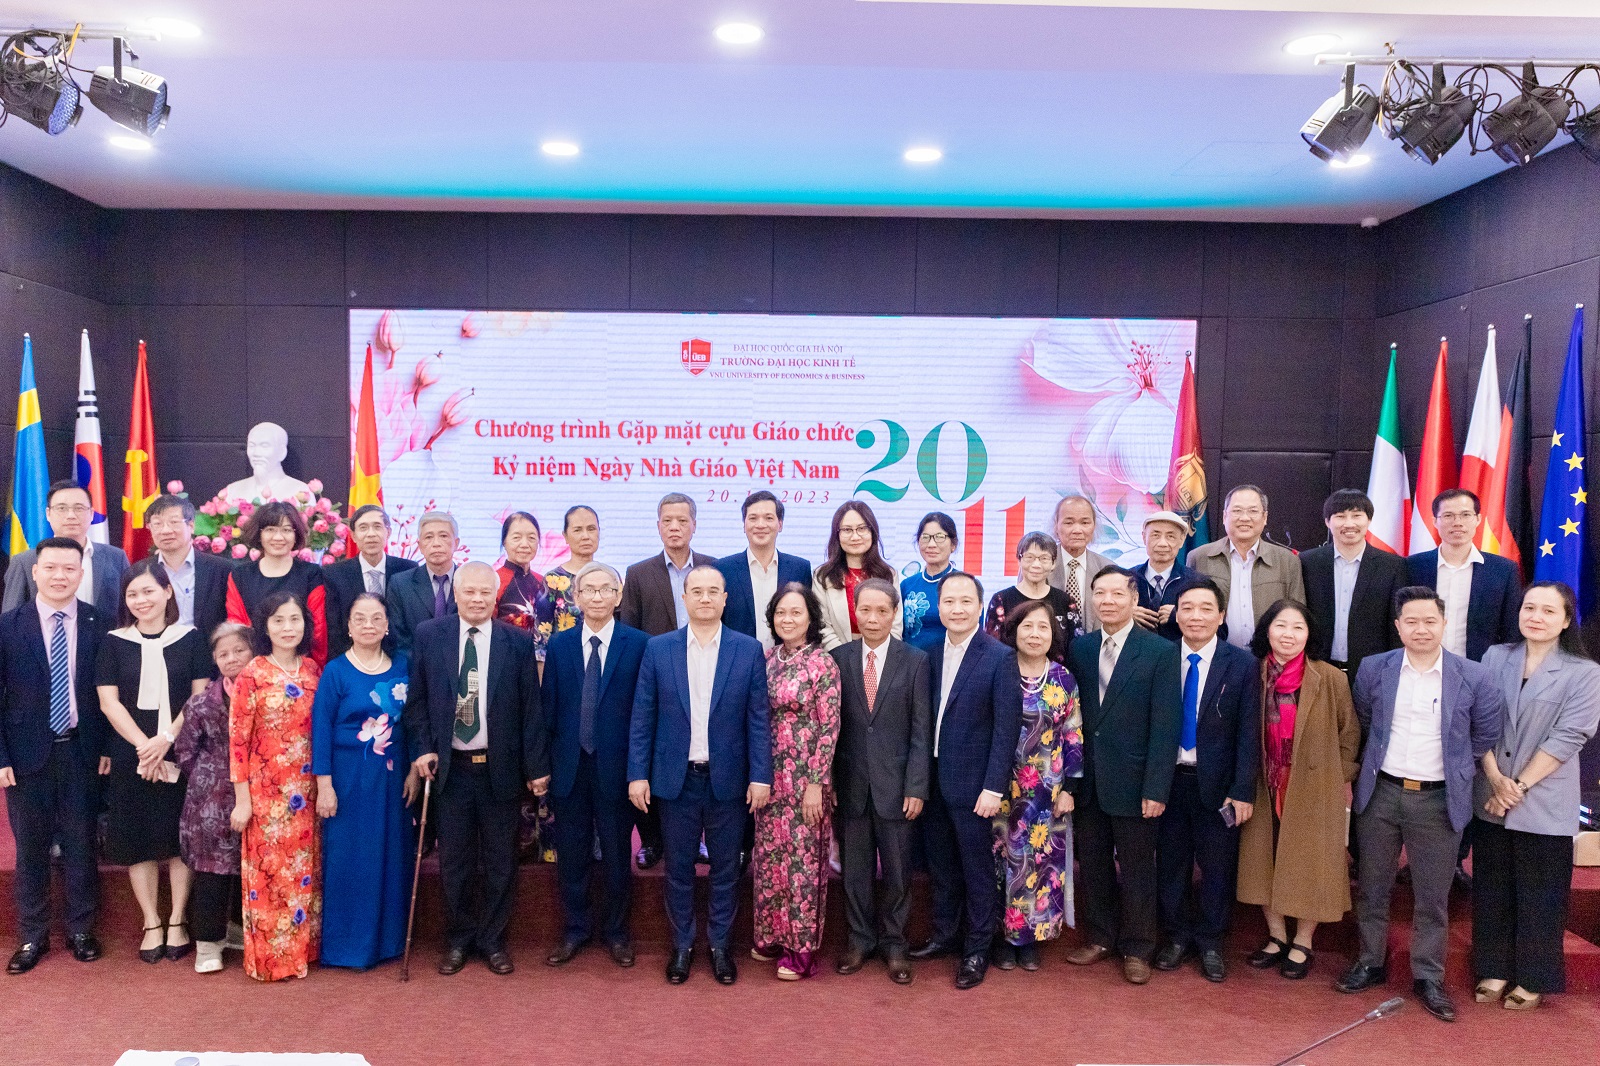 Honoring previous generations through activities connecting the Association of Former Lecturers on Vietnam Teachers' Day, November 20th